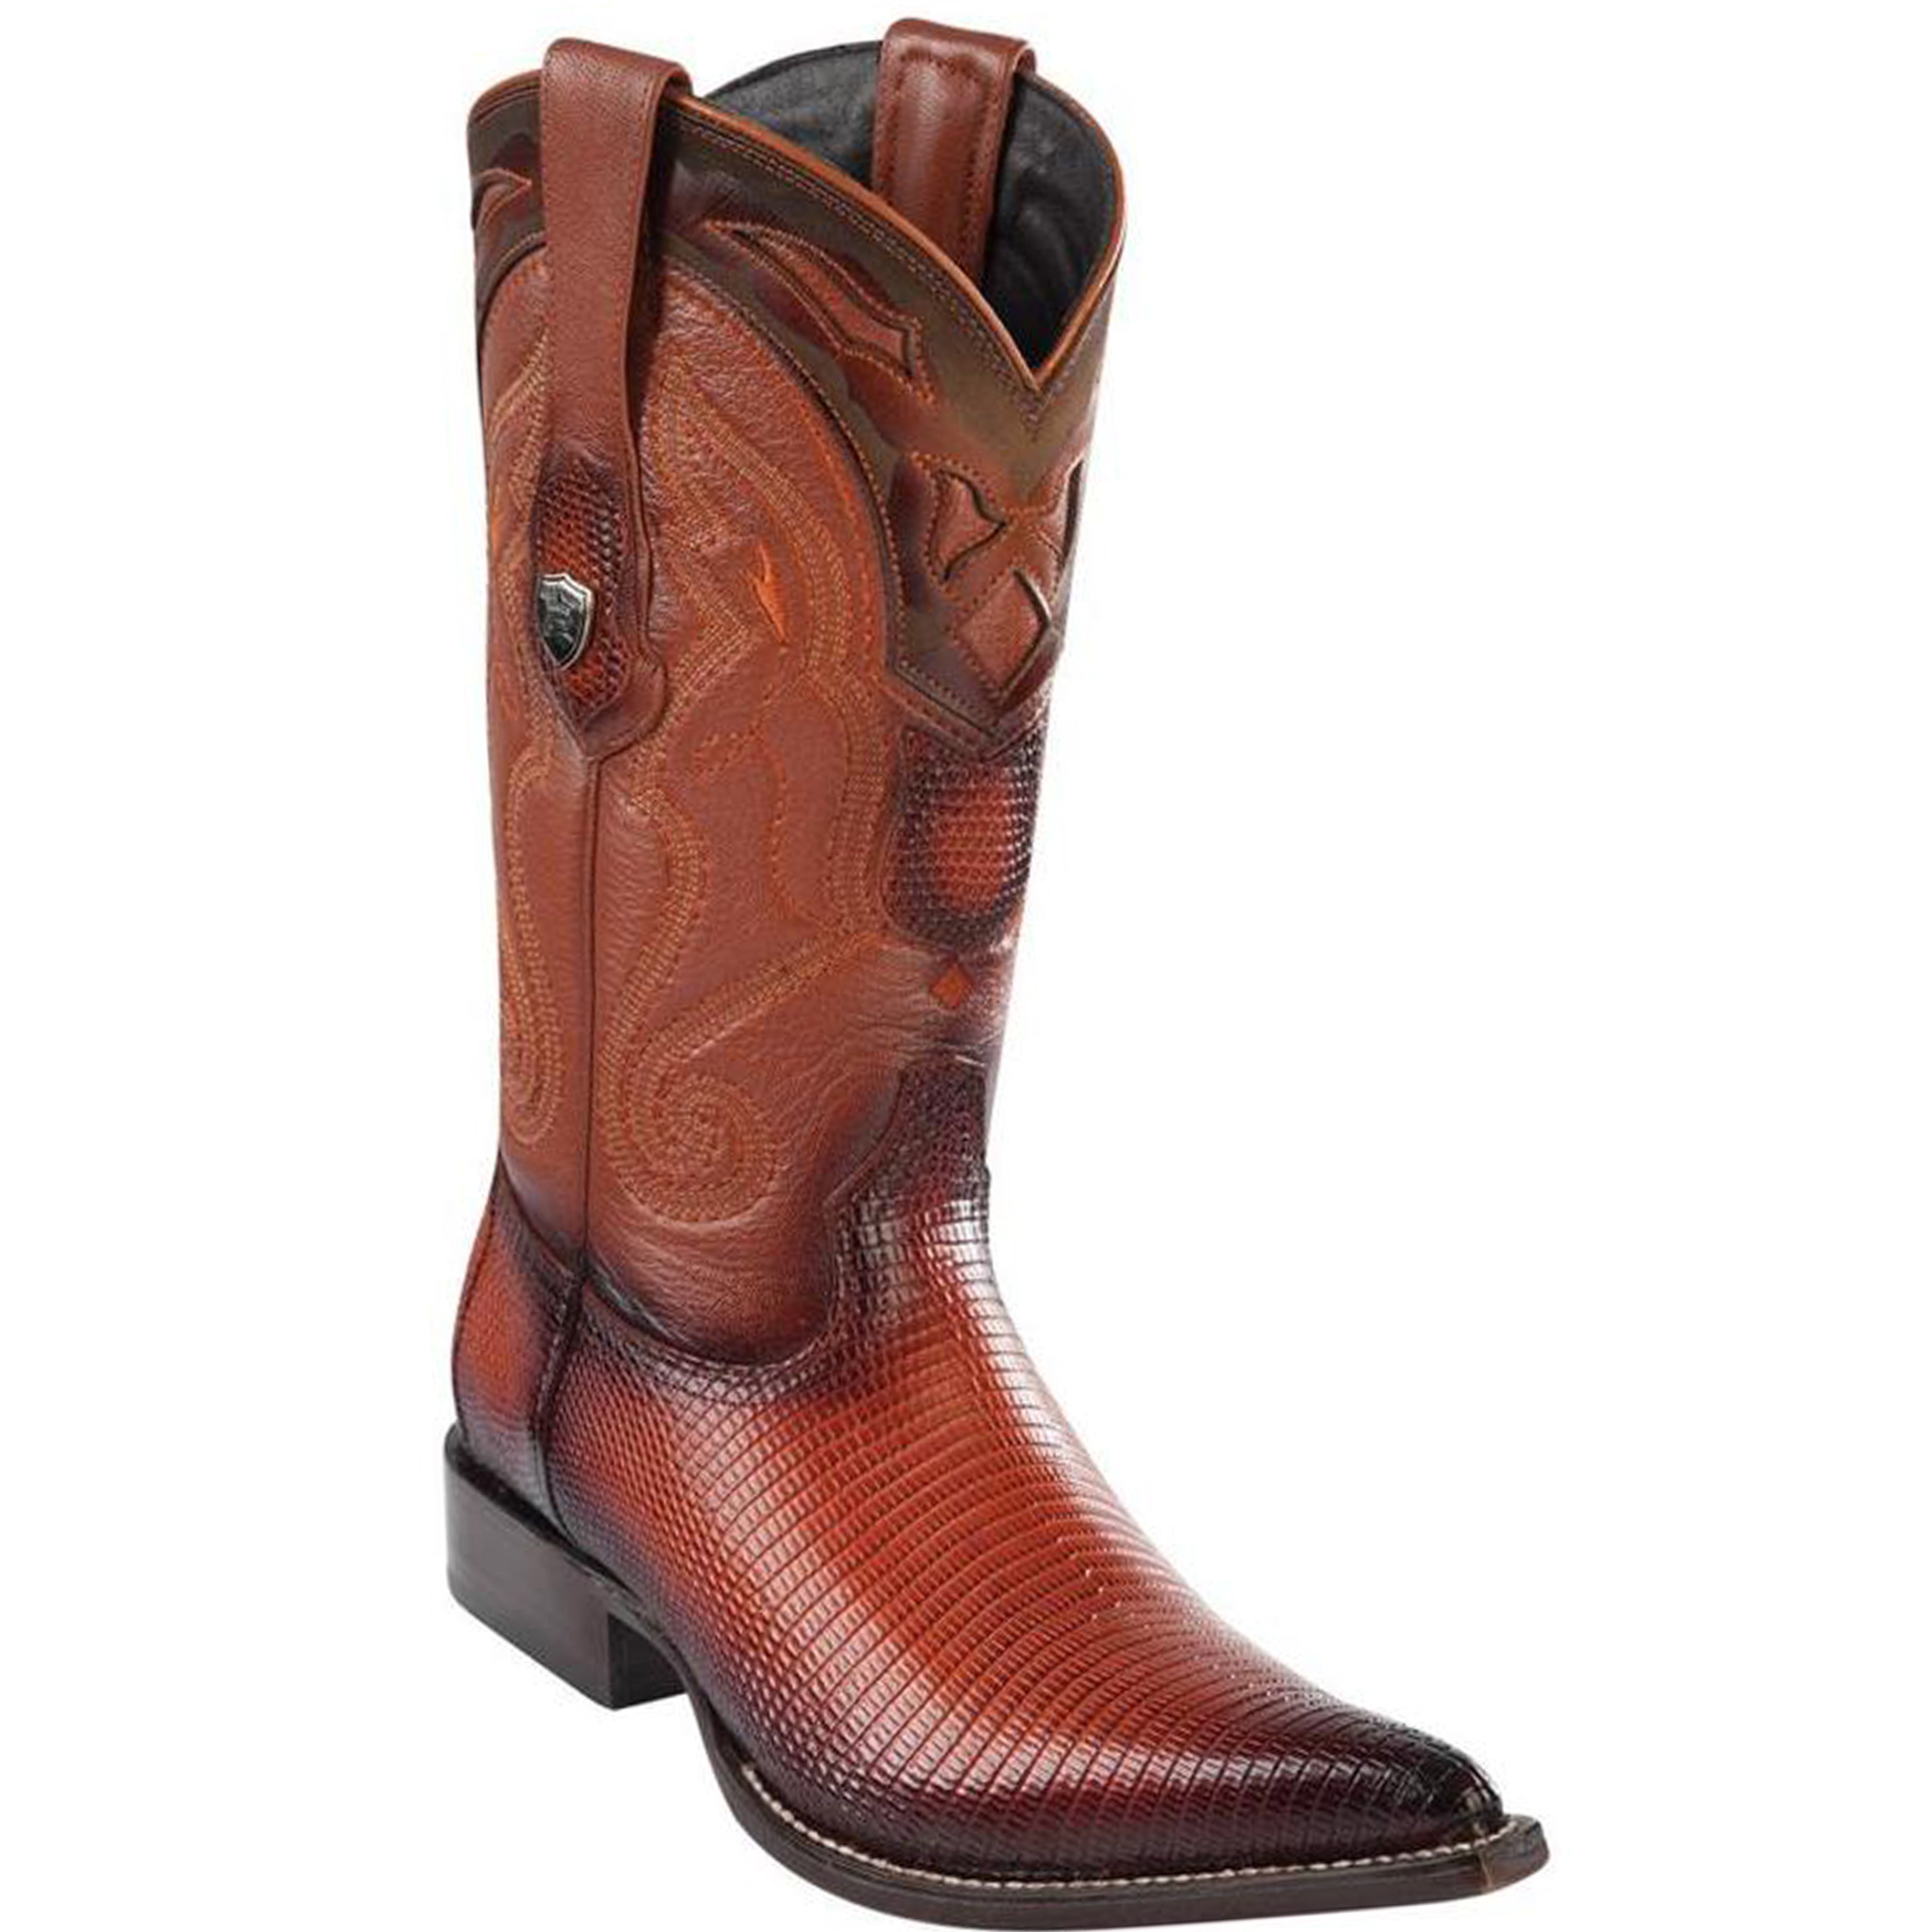 Ring Lizard Pointed Toe Cowboy Boots